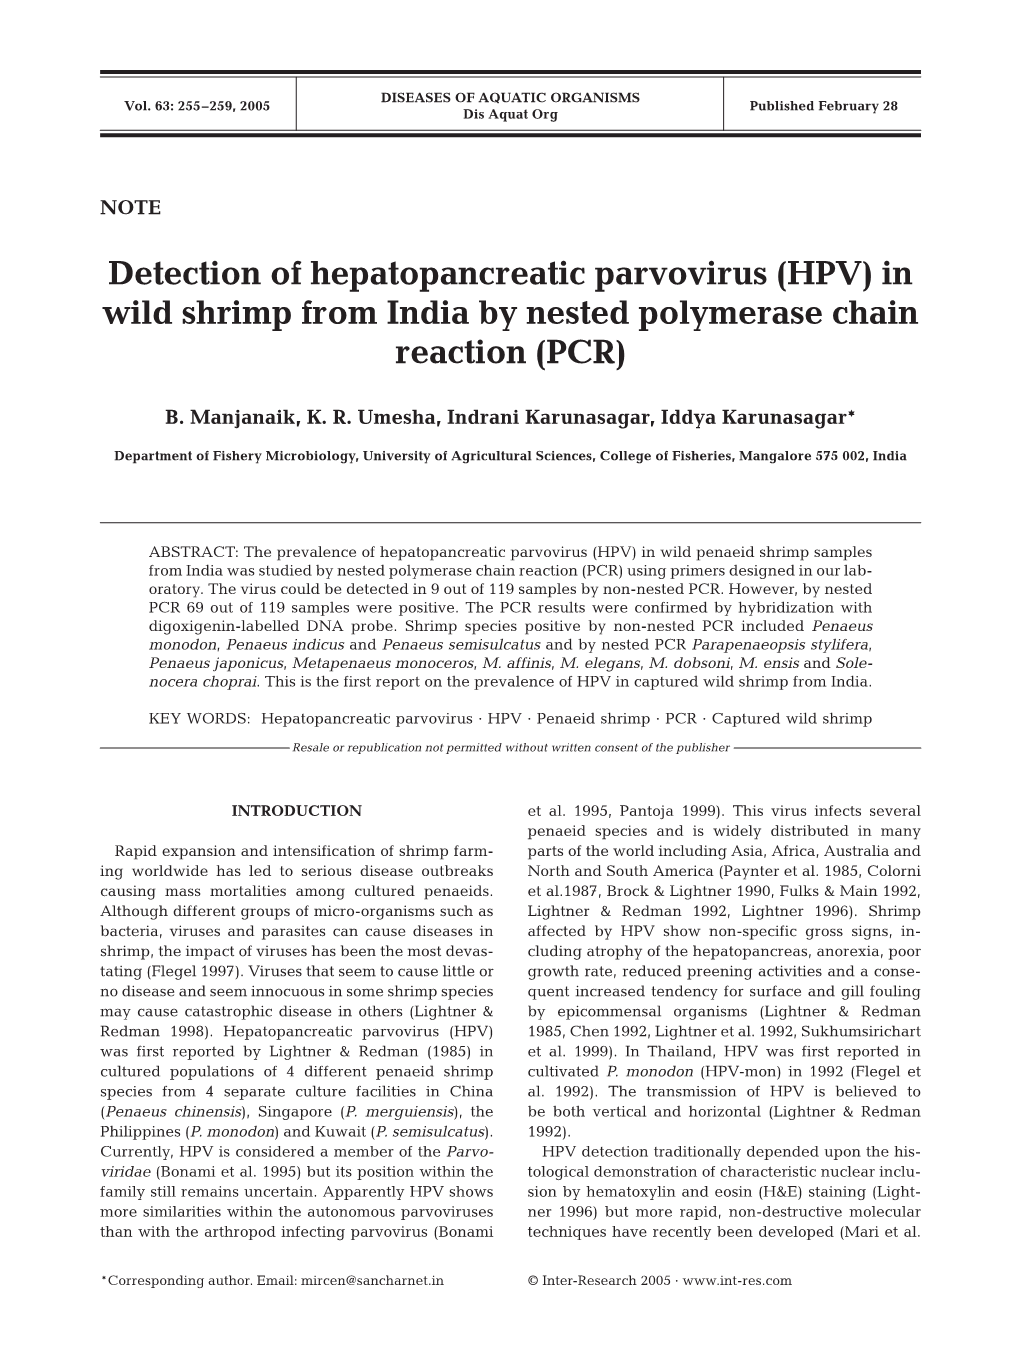 Detection of Hepatopancreatic Parvovirus (HPV) in Wild Shrimp from India by Nested Polymerase Chain Reaction (PCR)